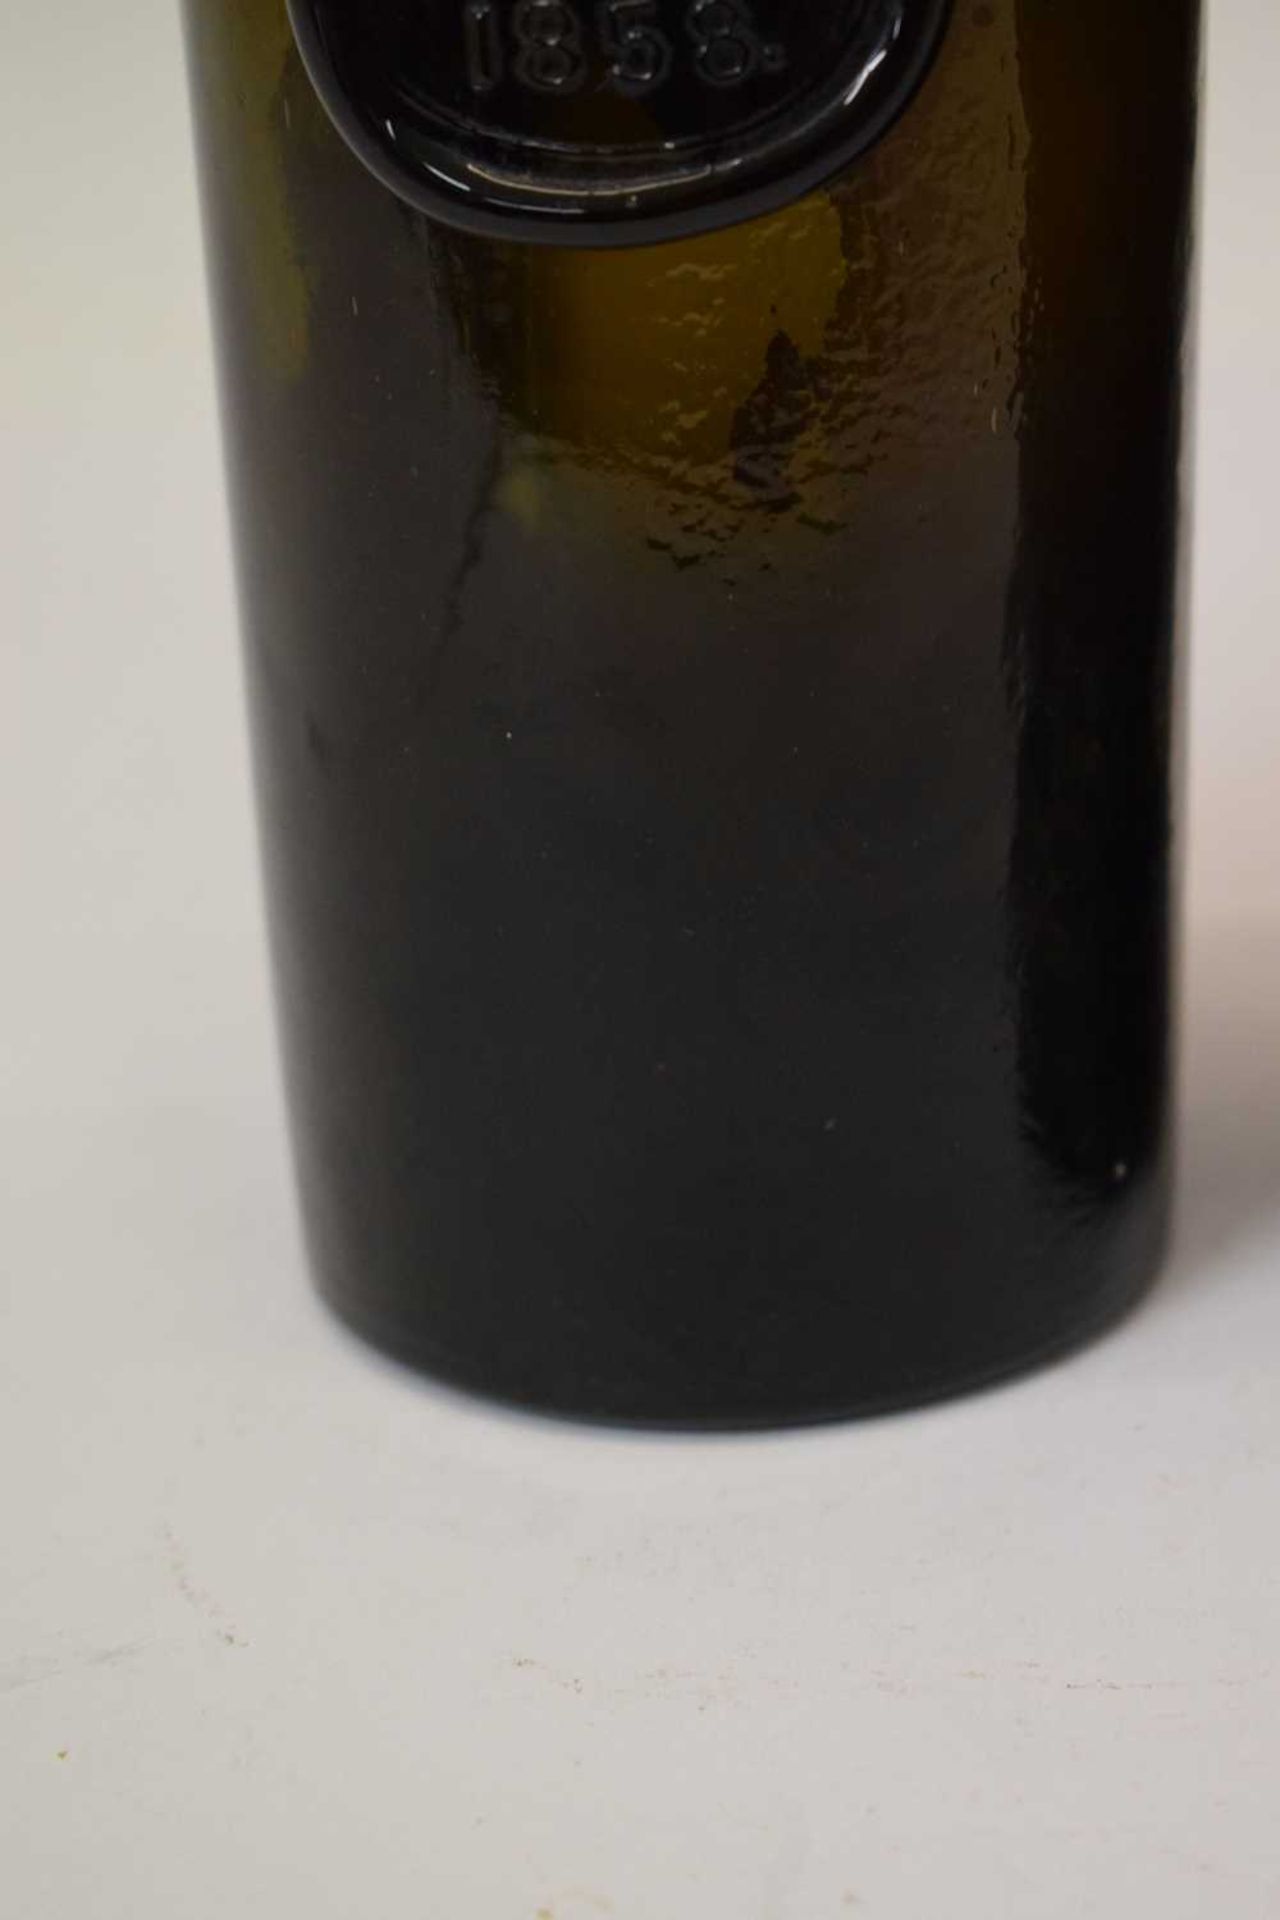 Mid 19th century seal-type Utility bottle - Image 12 of 20